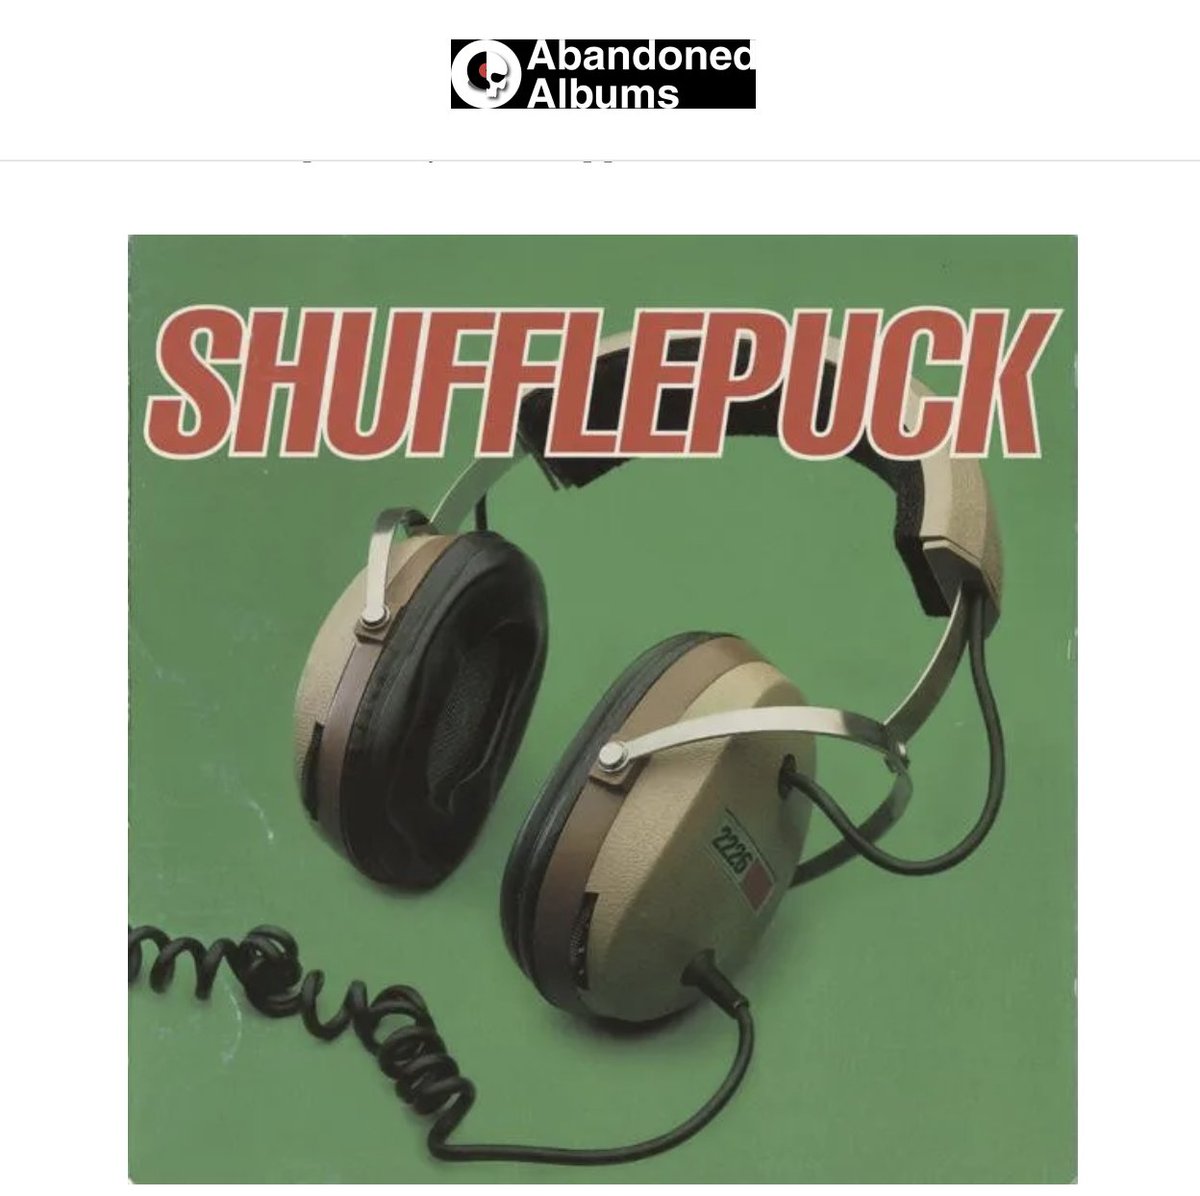 This write up about Shufflepuck is great...and so is the @AbandonedAlbums #podcast interview with Justin Fisher and Adam Orth from the band. 💙👓 #music #90smusic #alternative #geekrock abandonedalbums.substack.com/p/shuffle-it-a…